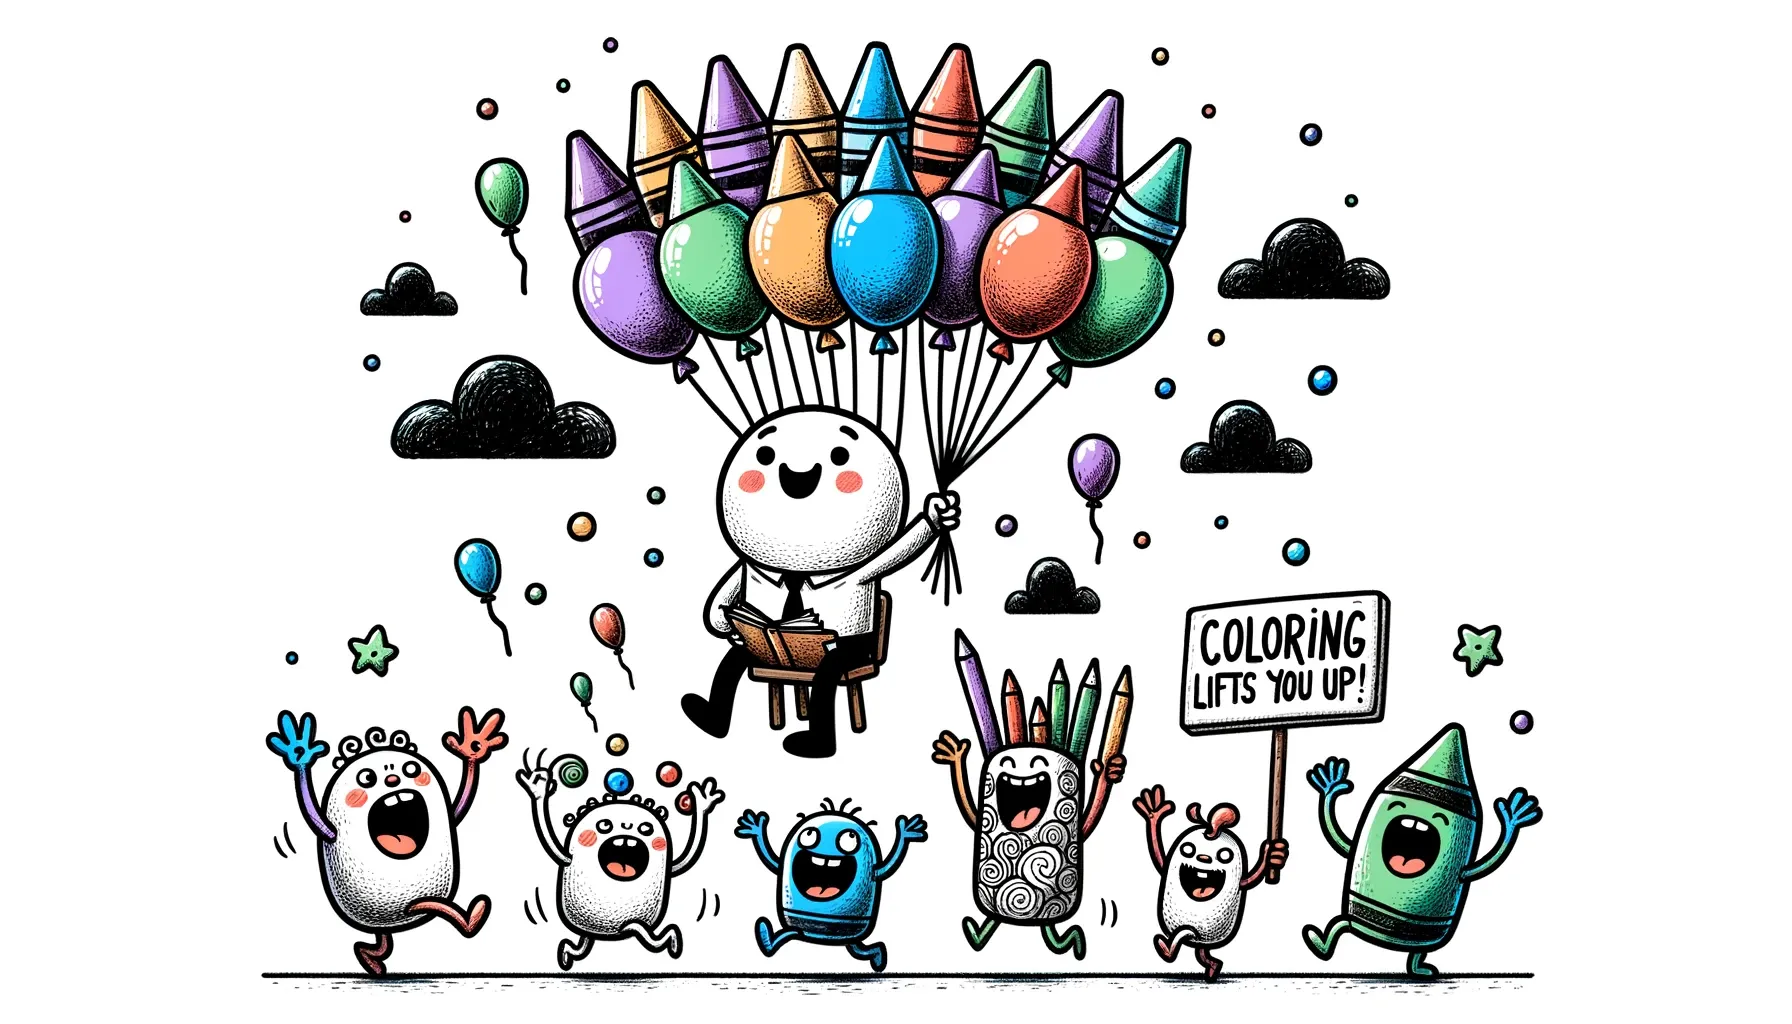 Illustration with a humorous, 5-year-old's doodle style. An adult doodle character floats in the air, lifted by a bunch of colorful balloons shaped like crayons.